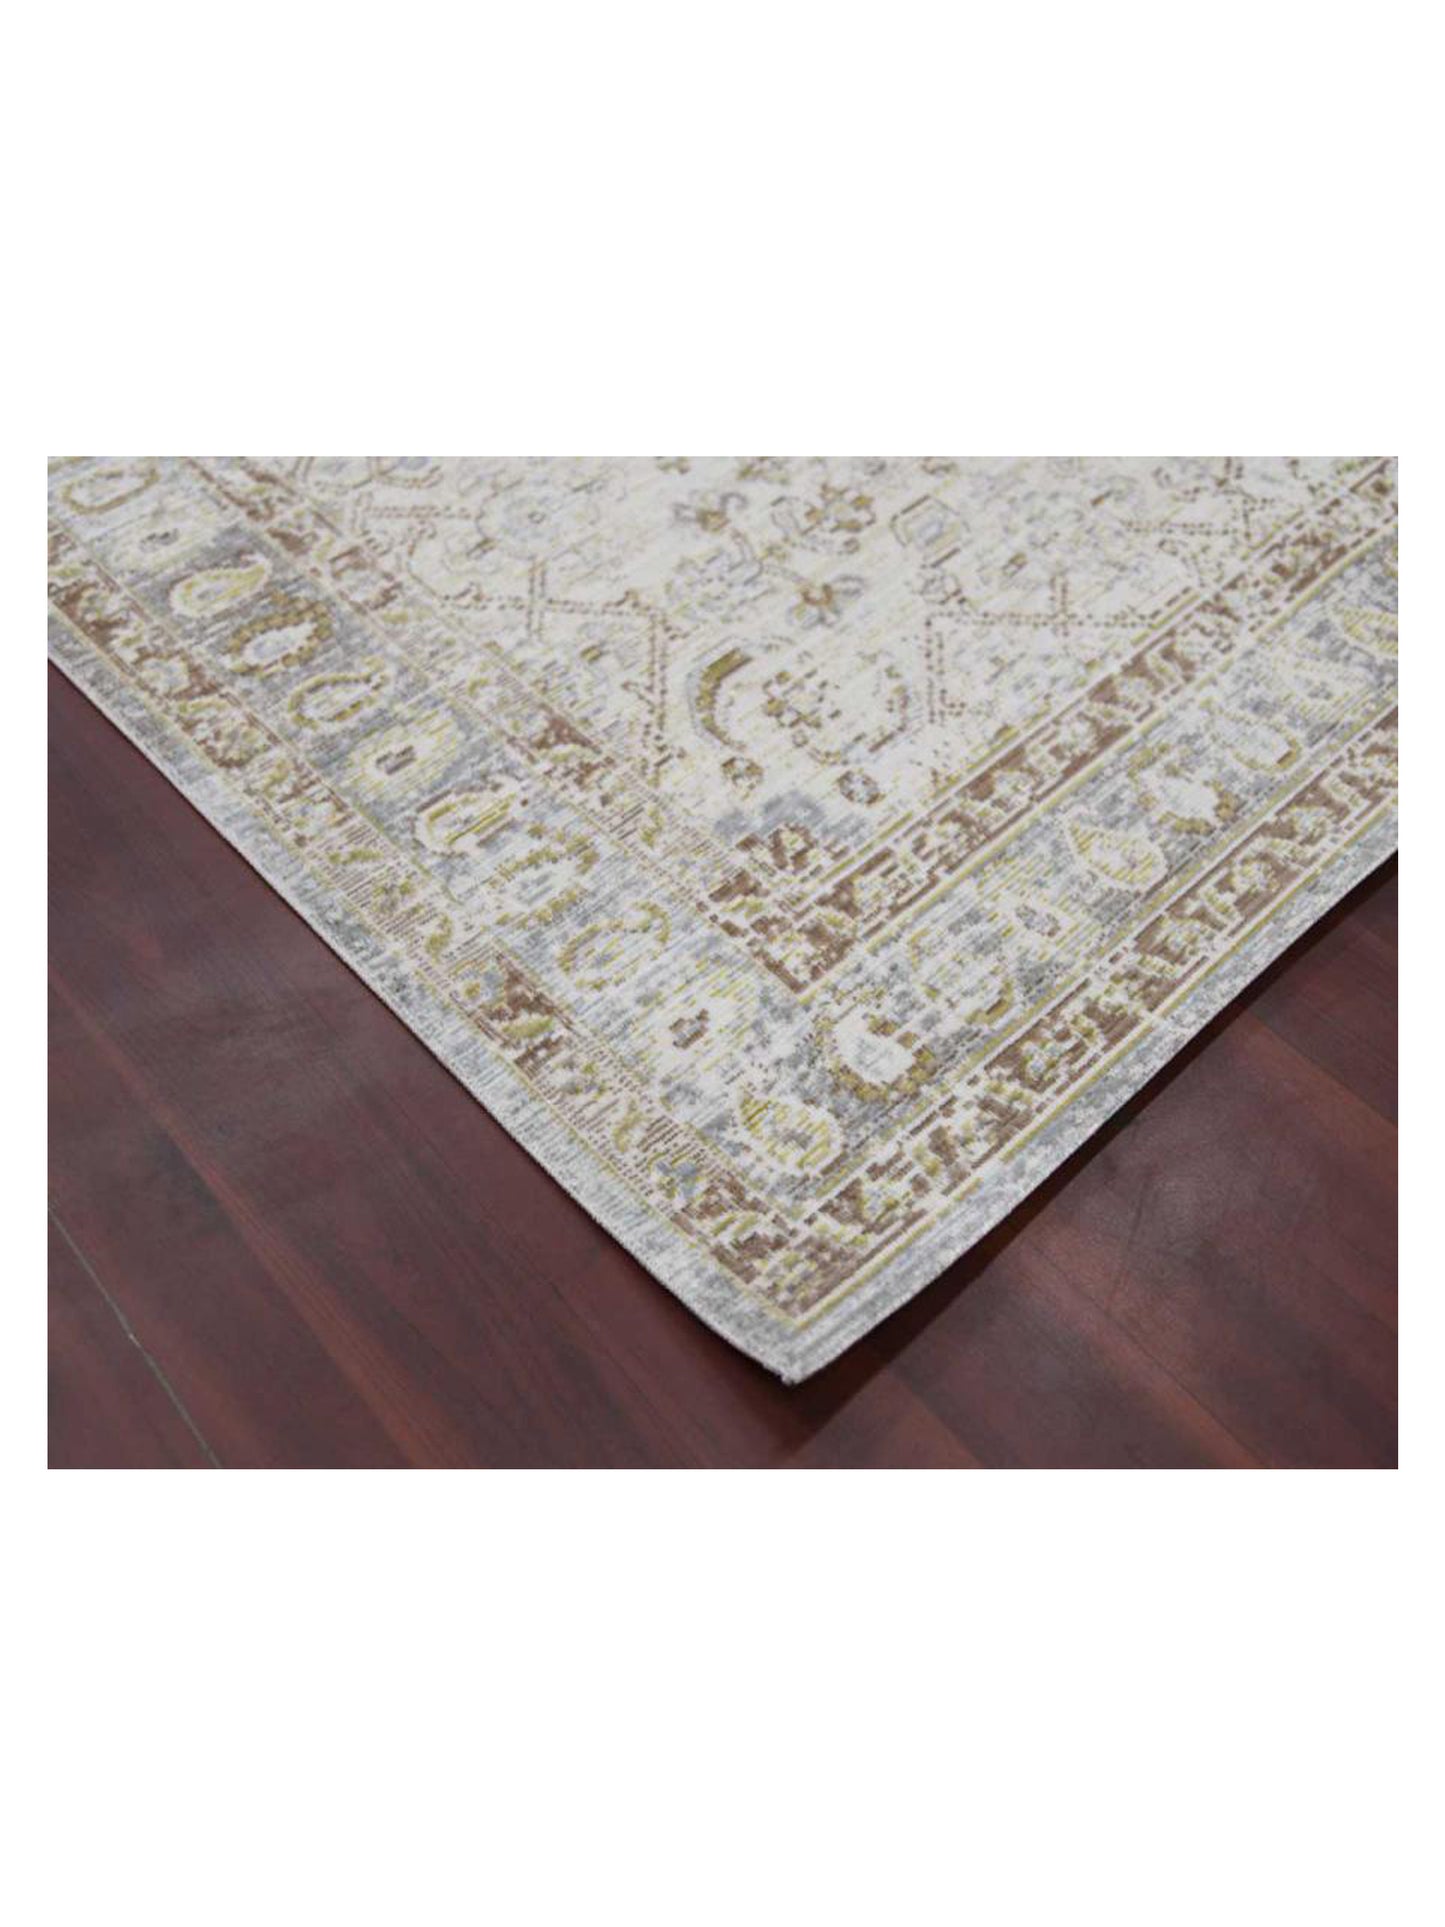 Limited Odeya OR-803 GRAY IVORY Traditional Machinemade Rug